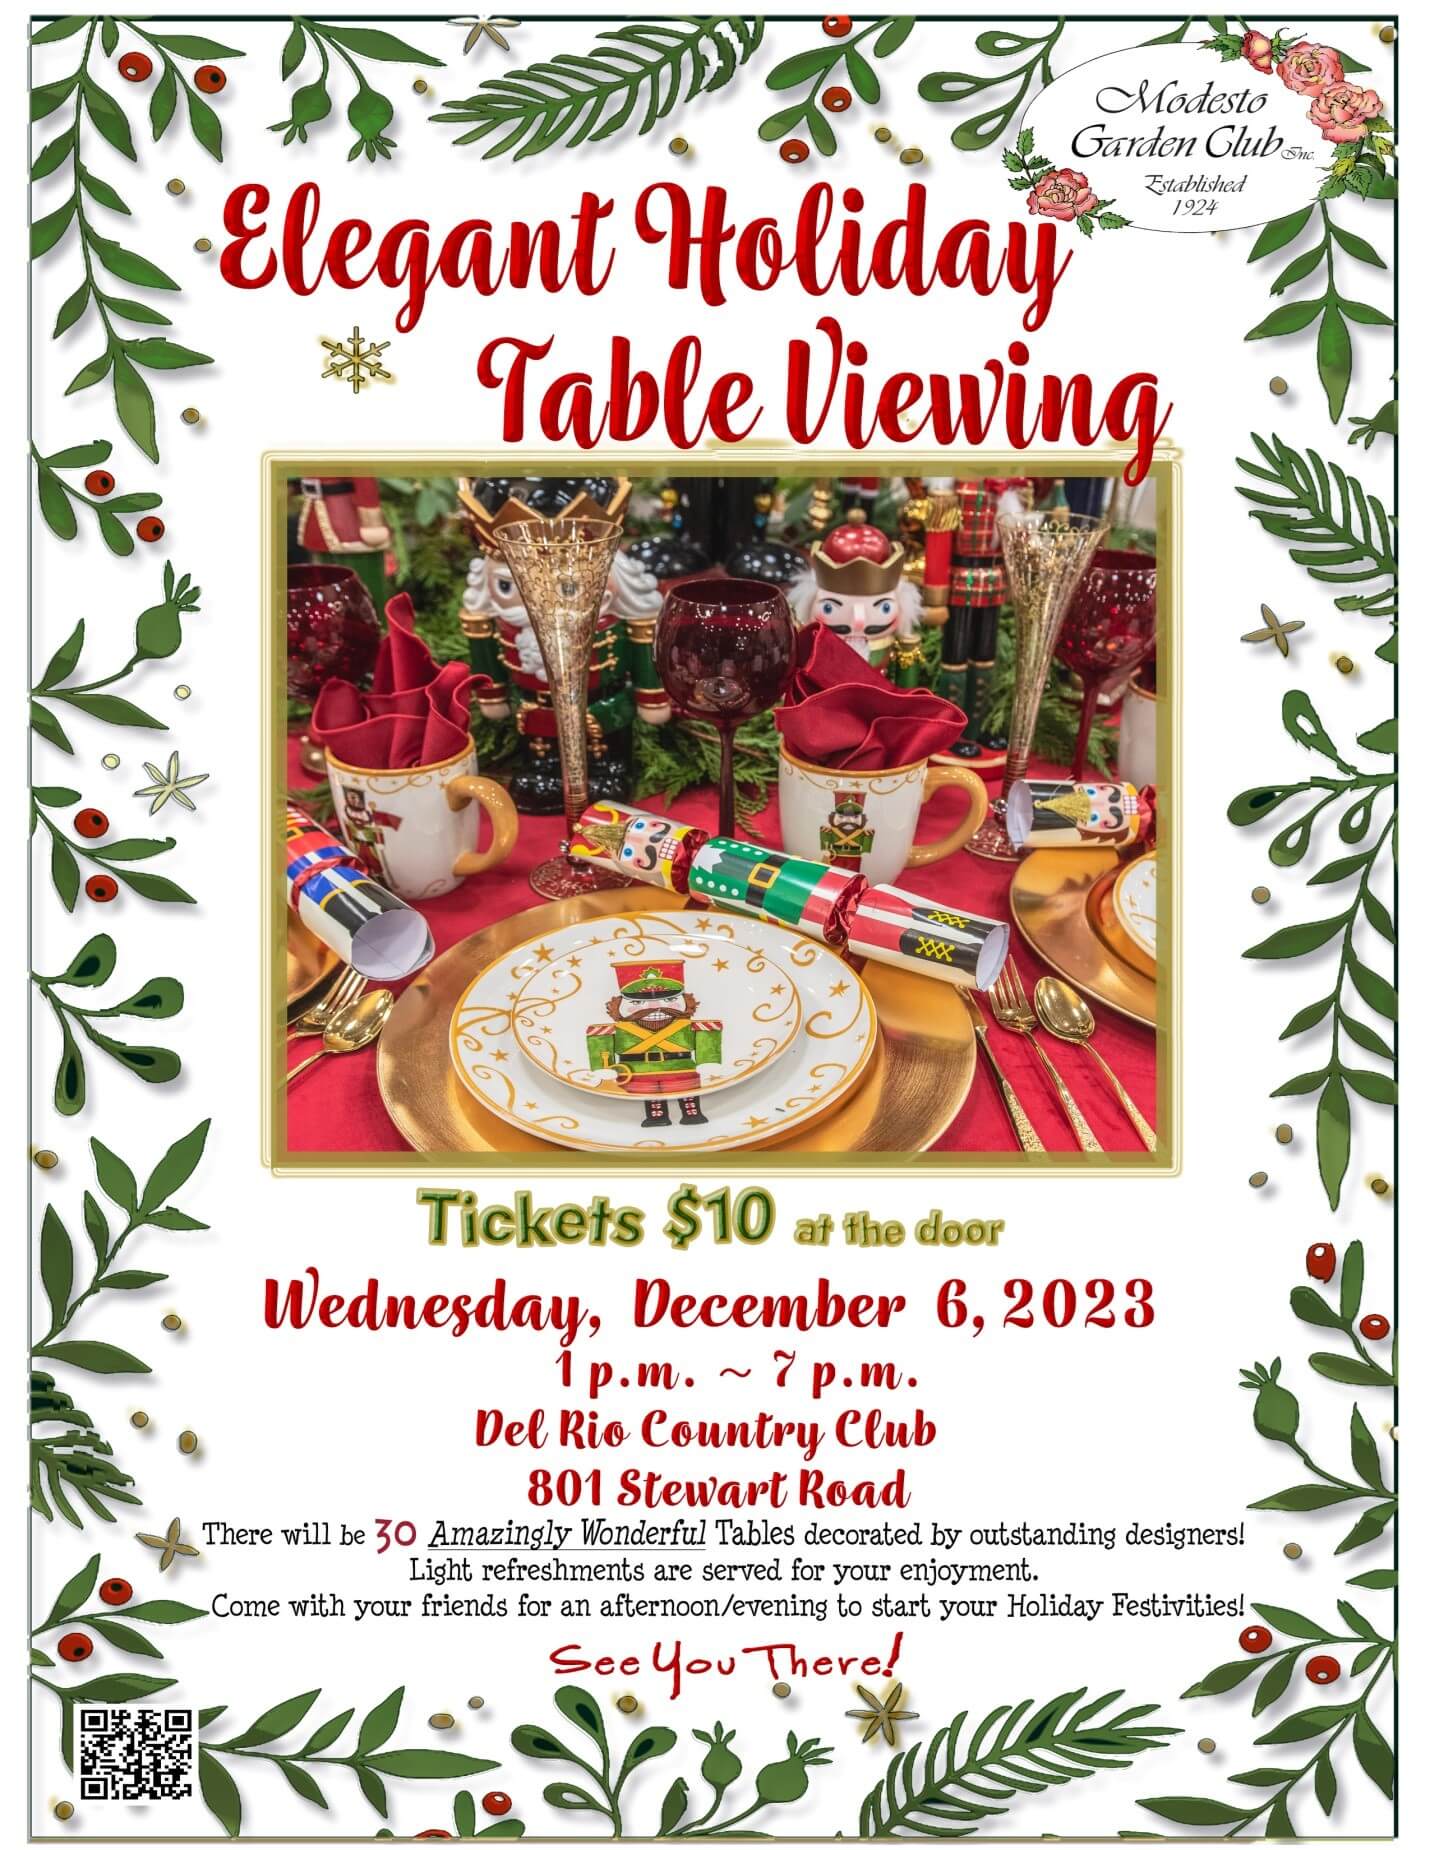 Elegant Holiday Table Viewing